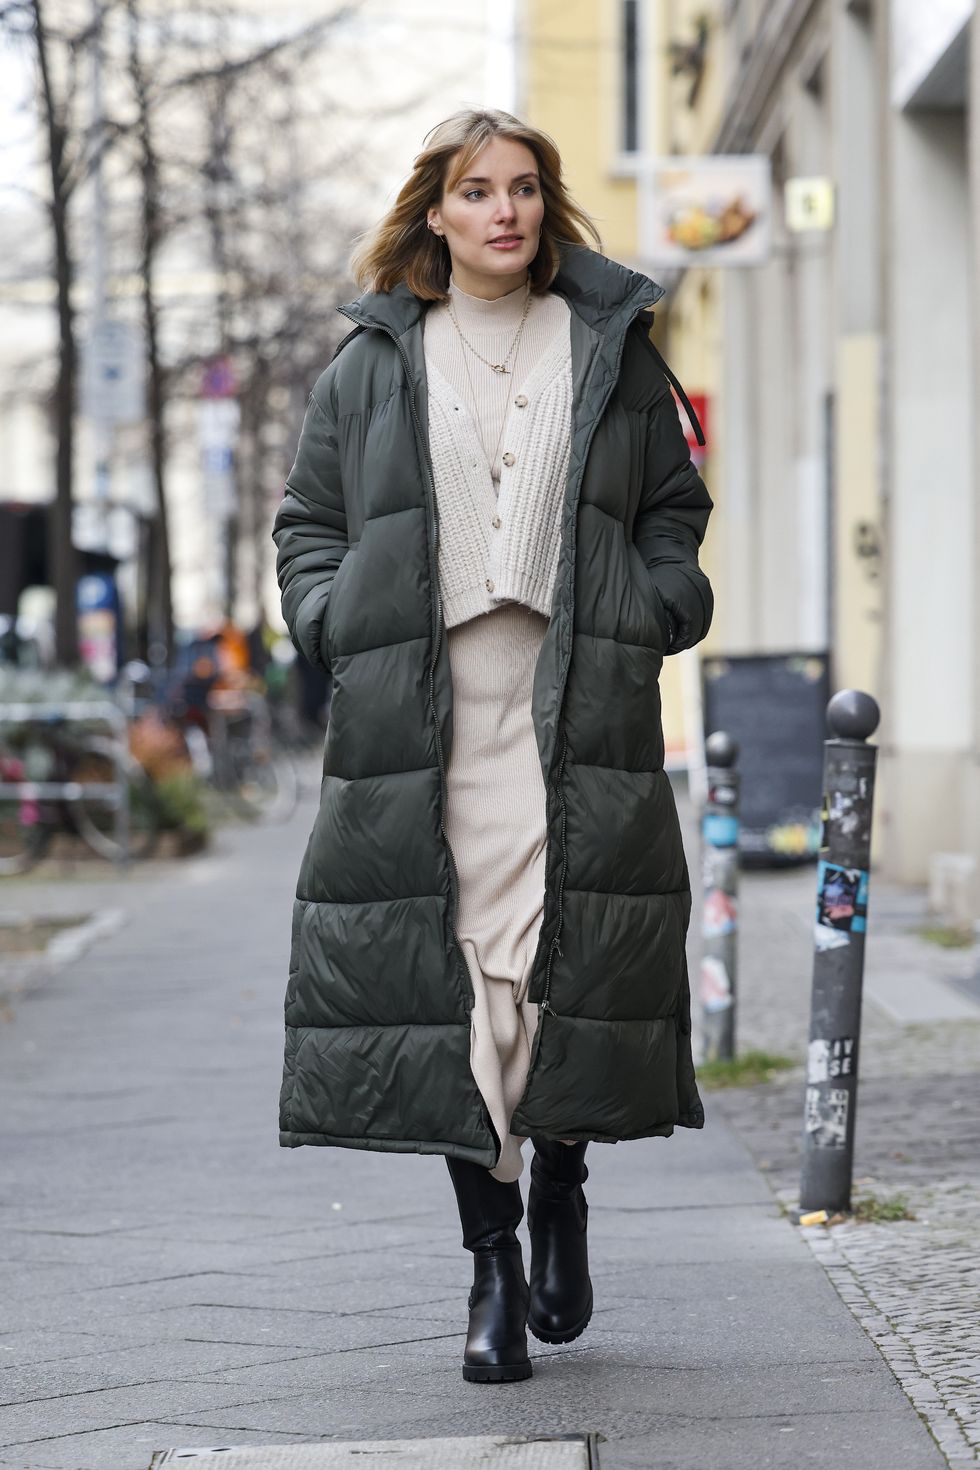 berlin, germany   december 15 influencer marie von den benken alias regendelfin wearing a blonde fringe bob hairstyle, a long army green down puffer coat   leger by lena gercke, a beige knitted top and matching skirt with a slit   leger by lena gercke, a short beige cardigan by oak  fort and black knee high boots by anna field via zalando during a street style shooting on december 15, 2020 in berlin, germany photo by streetstyleshootersgetty images